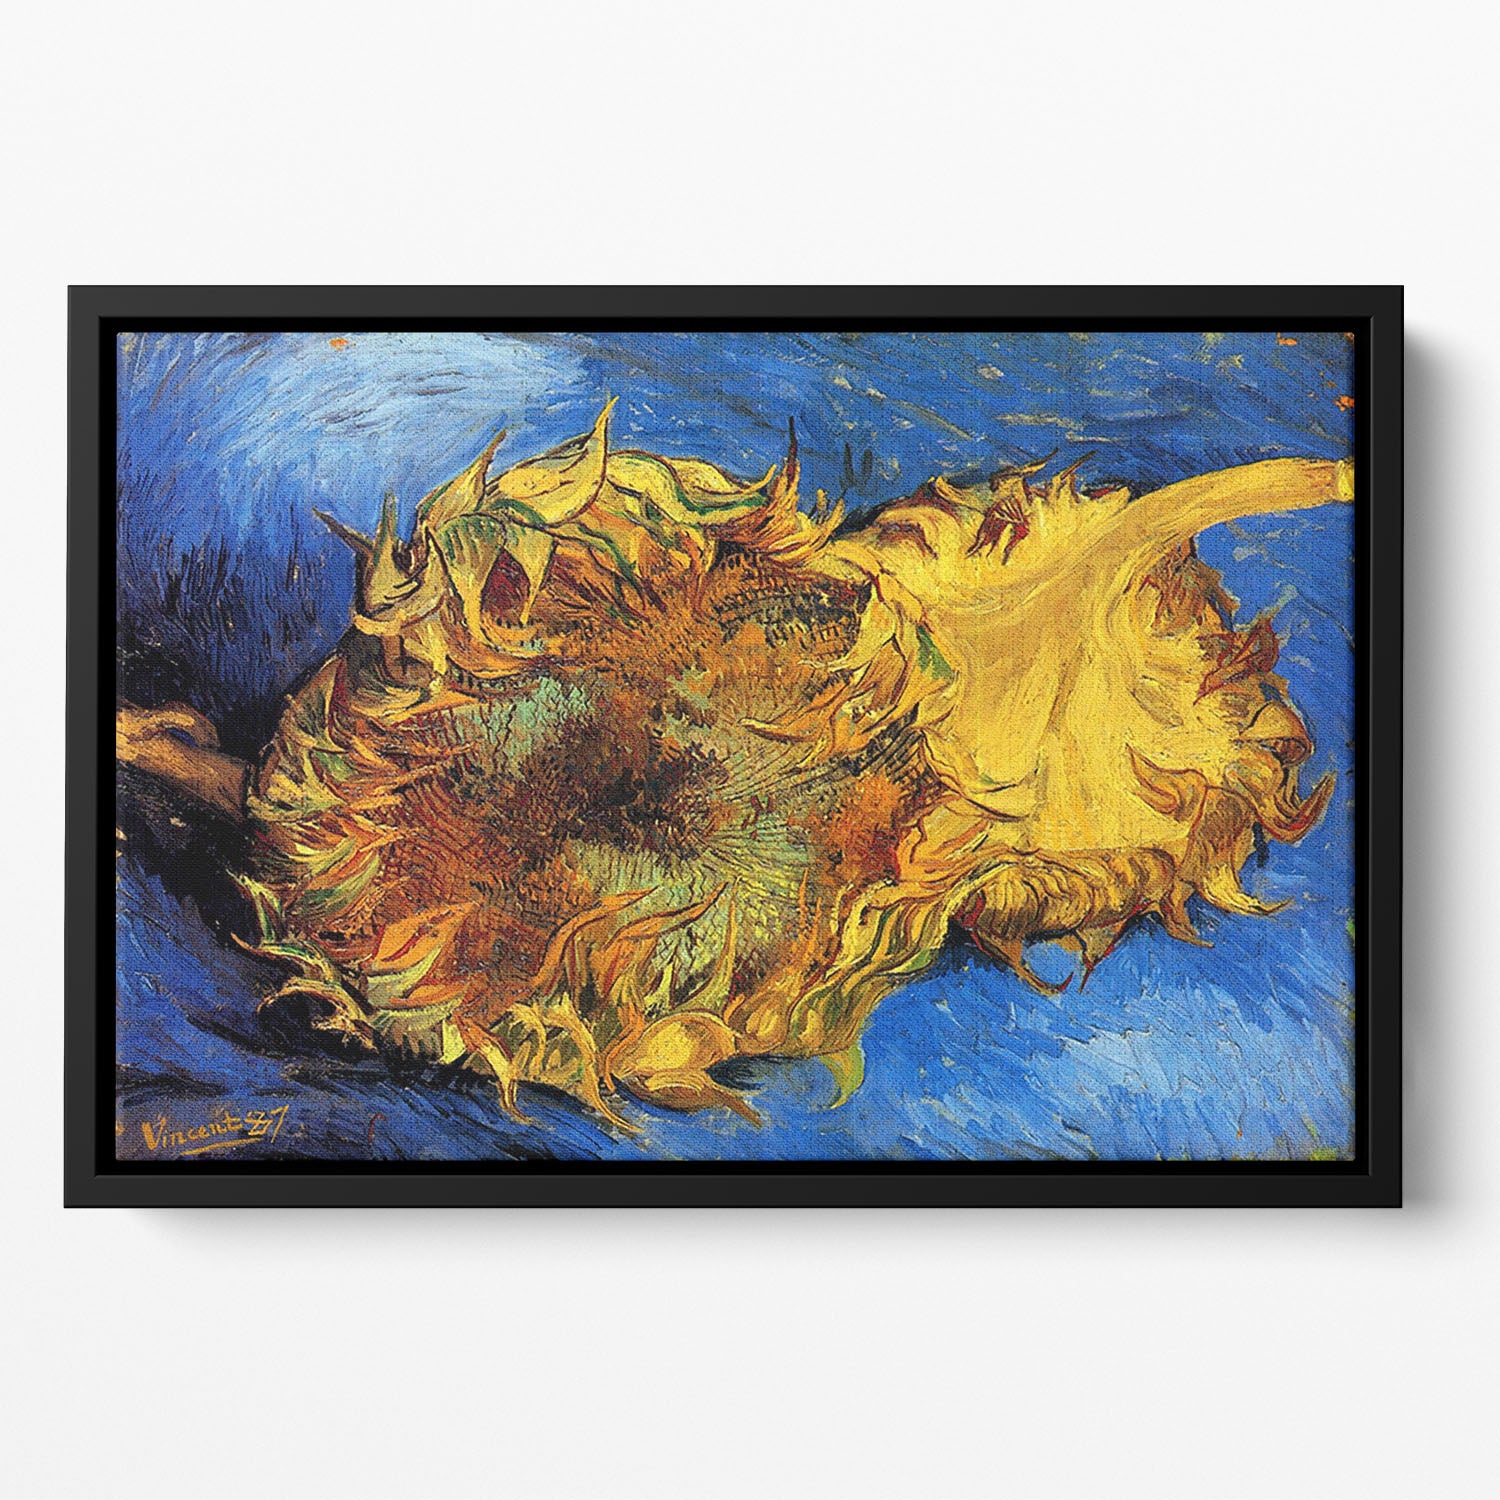 Two Cut Sunflowers 3 by Van Gogh Floating Framed Canvas